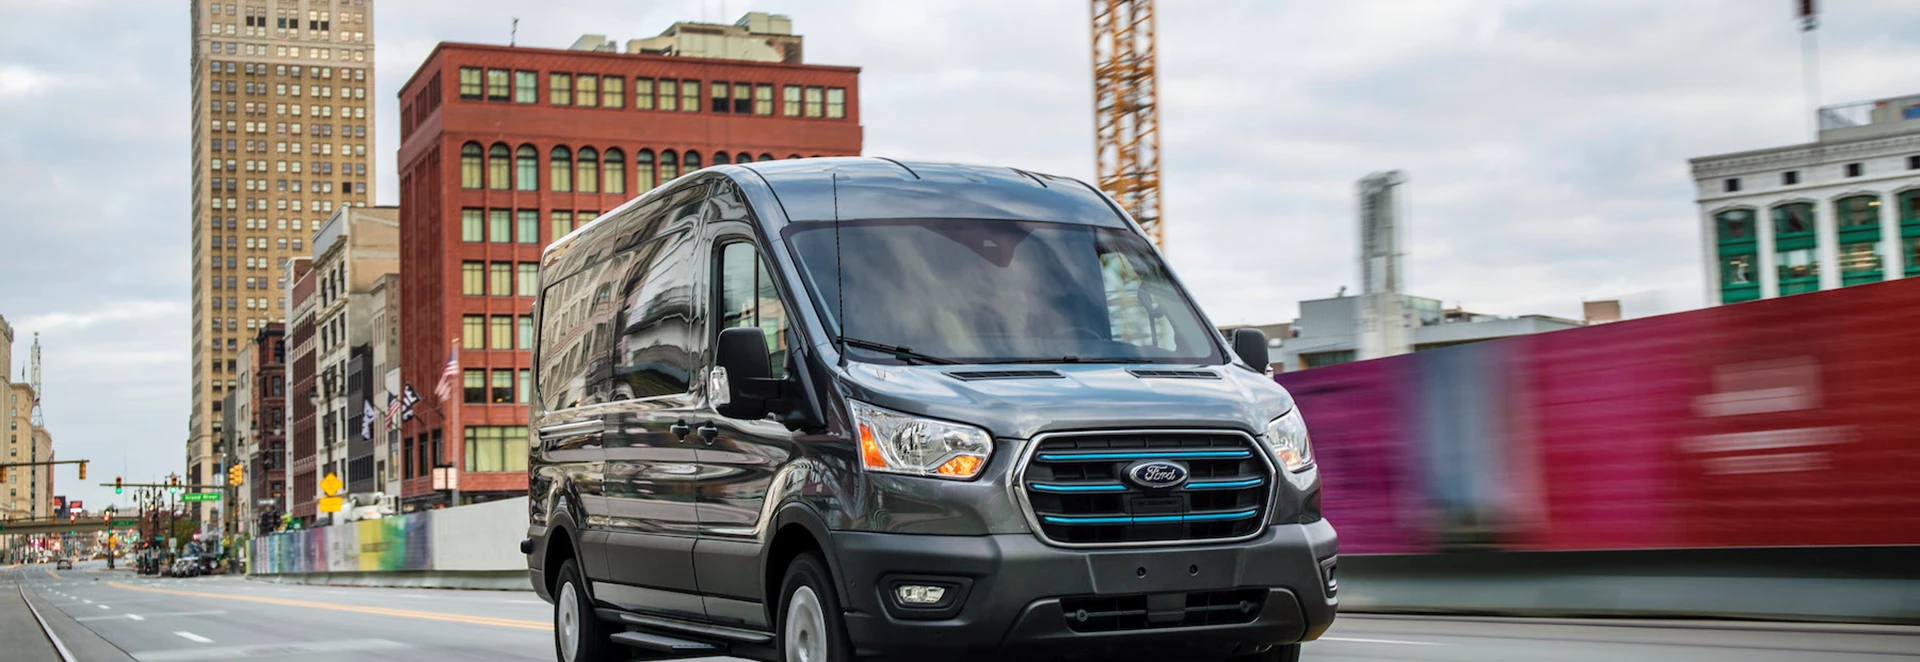 Electric Ford E-Transit unveiled to shake up the commercial vehicle market 